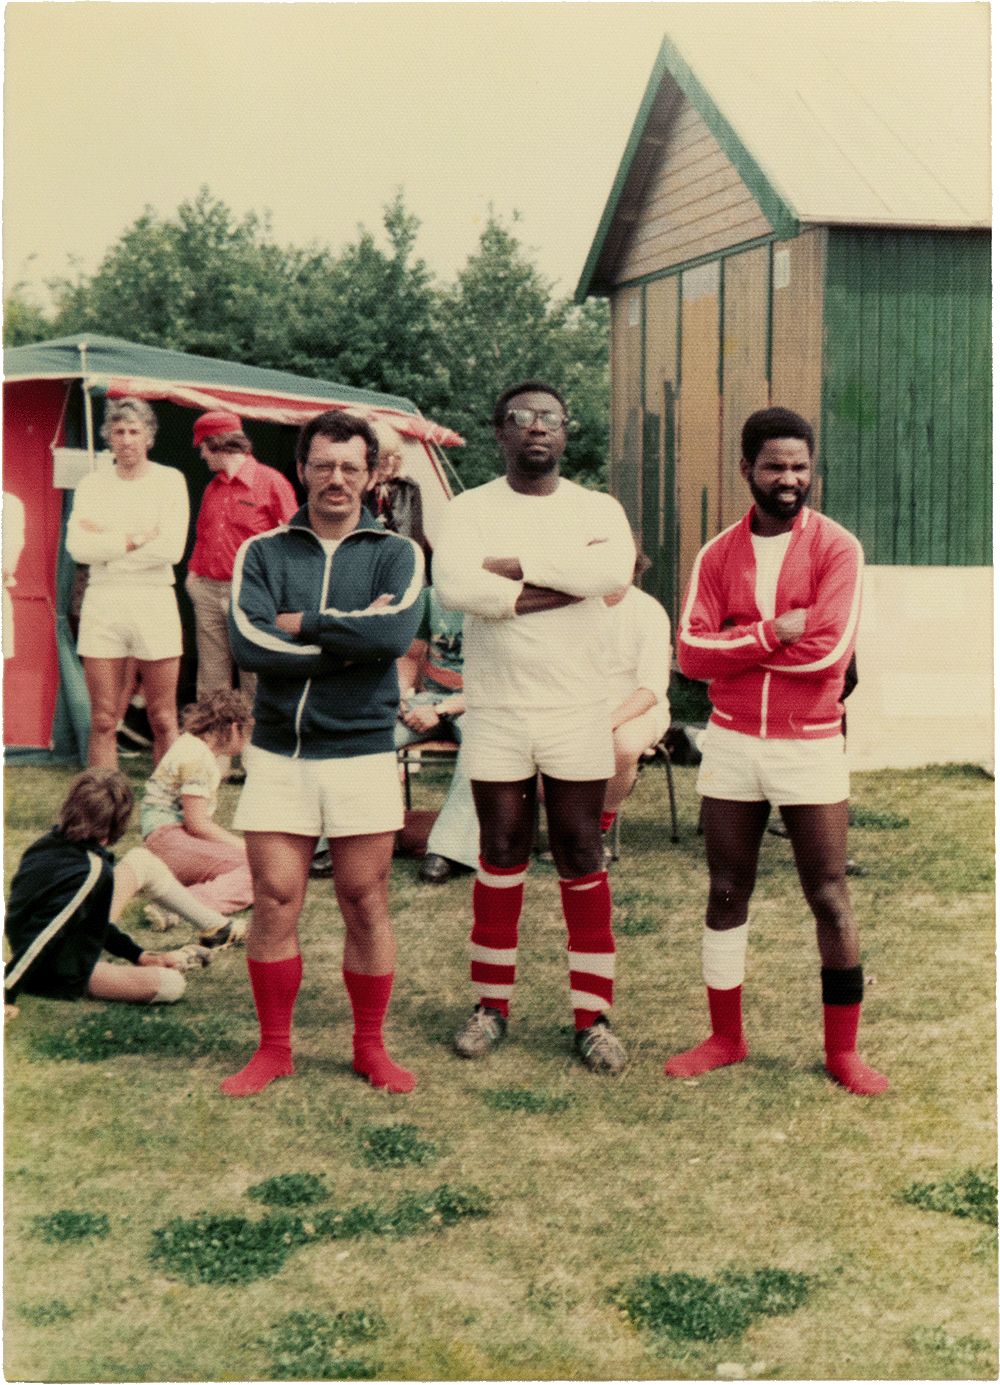 Archival photo showing three man (one white, two Black) in soccer outfits at a campground, with people in the background. © Sander Coers